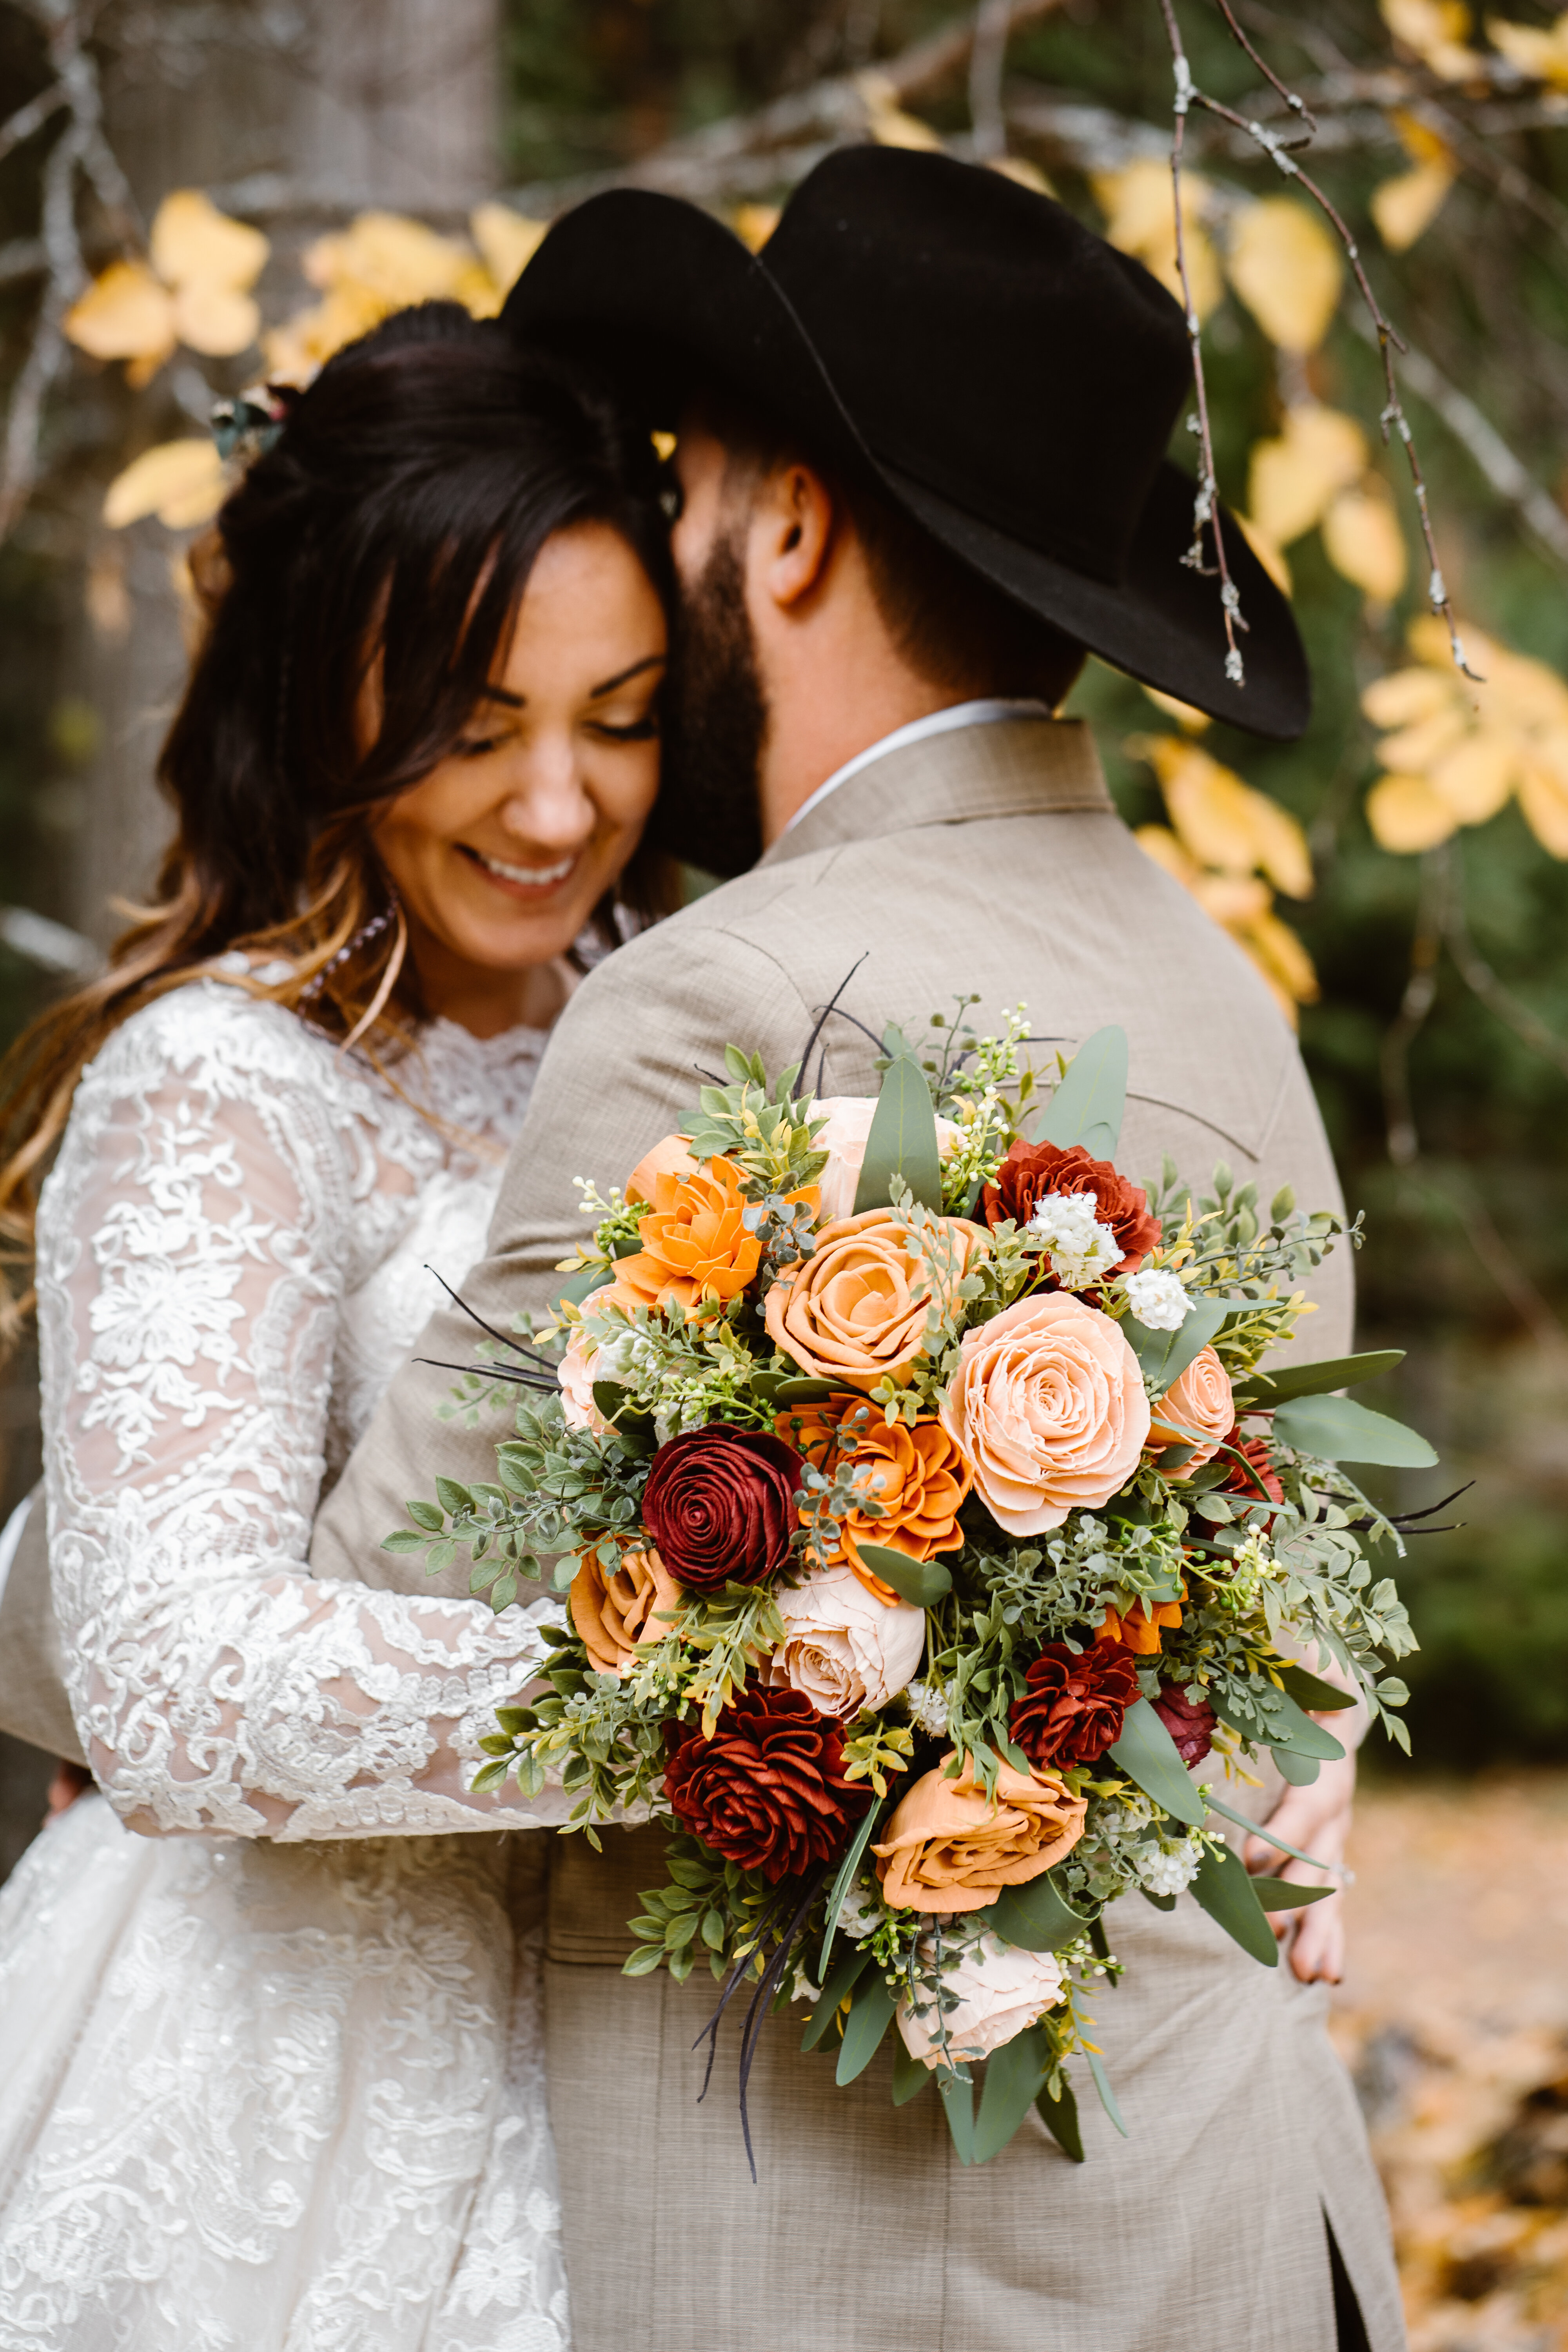 Rustic Blush and Baby's Breath Bouquet – Teton Wood Blooms